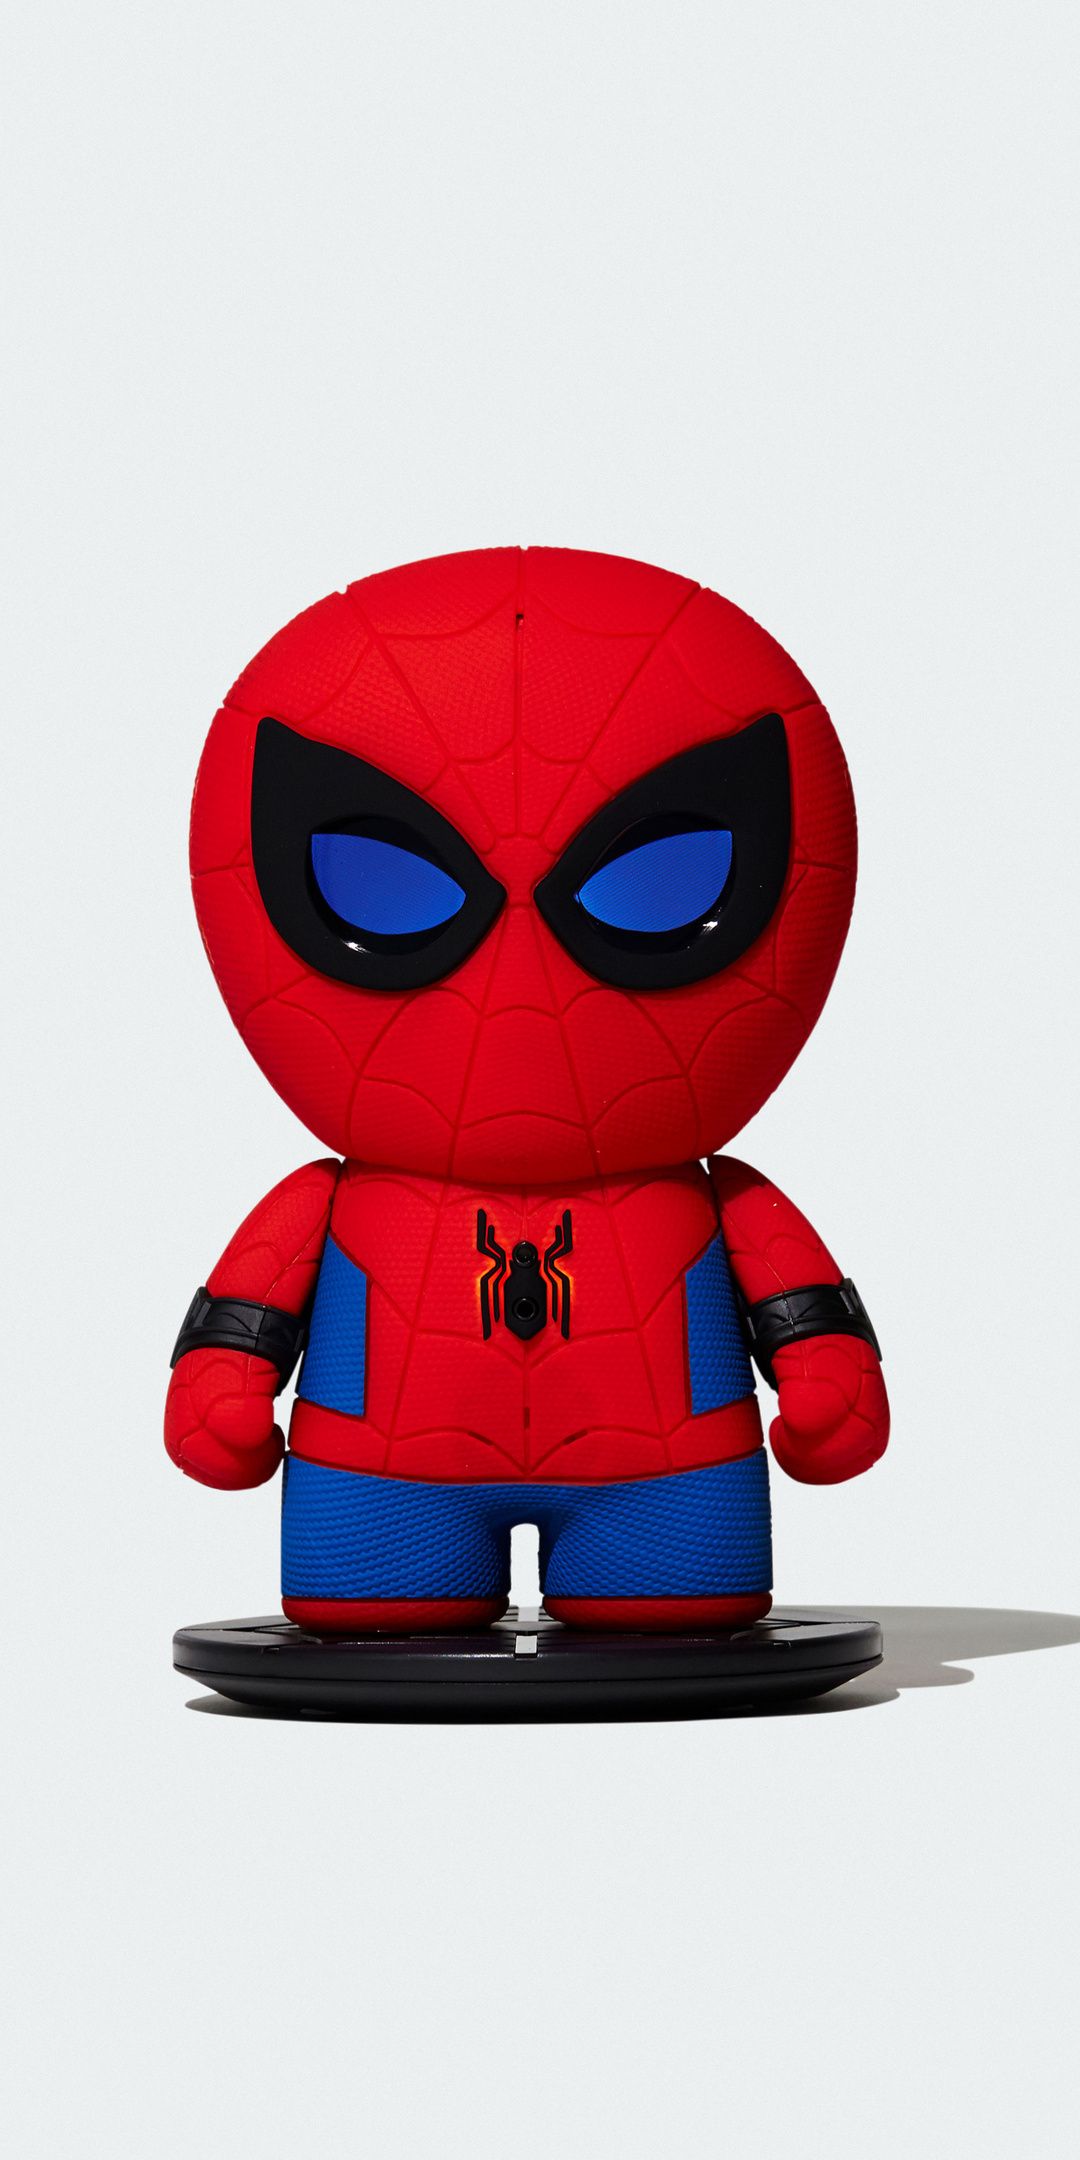 Mini Spiderman Toy 5k One Plus 5T, Honor 7x, Honor view Lg Q6 HD 4k Wallpaper, Image, Background, Photo and Picture